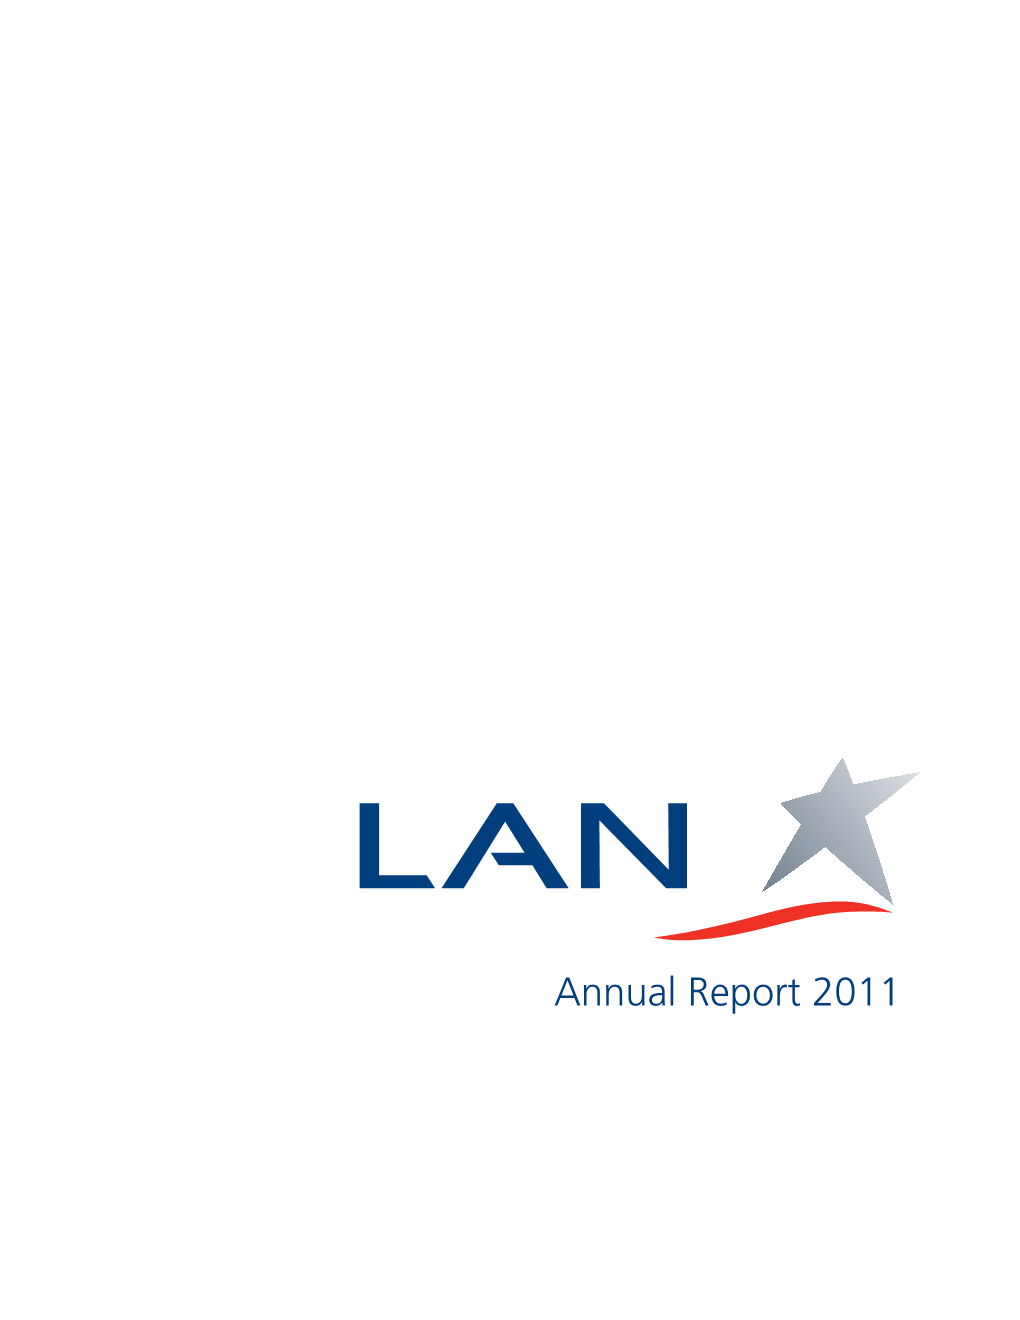 2011 Annual Report 2011 Contents